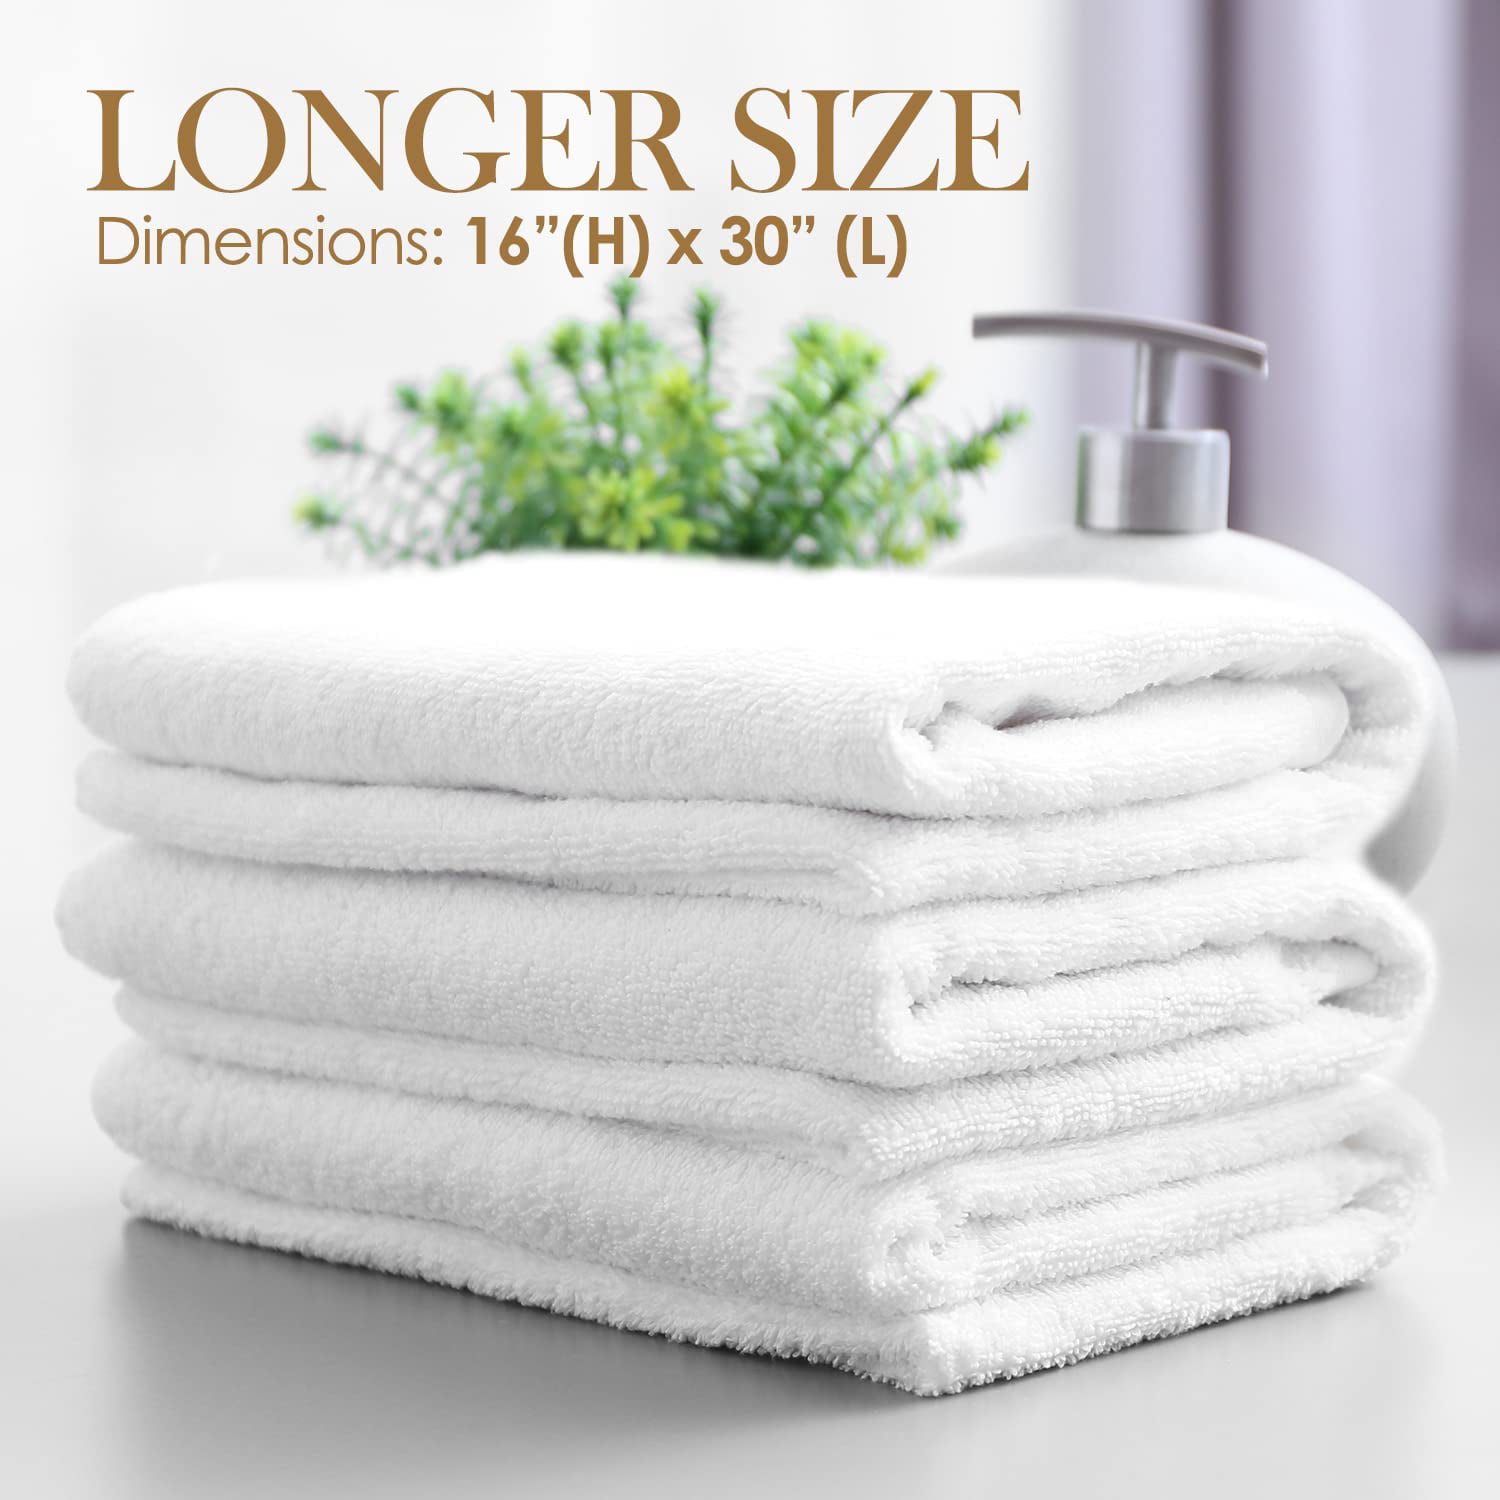 Cotton Craft Ultra Soft 6 Pack Hand Towels 16x28 White Weighs 6 Ounces Each - 100% Pure Ringspun Cotton - Luxurious Rayon Trim - Ideal for Everyday